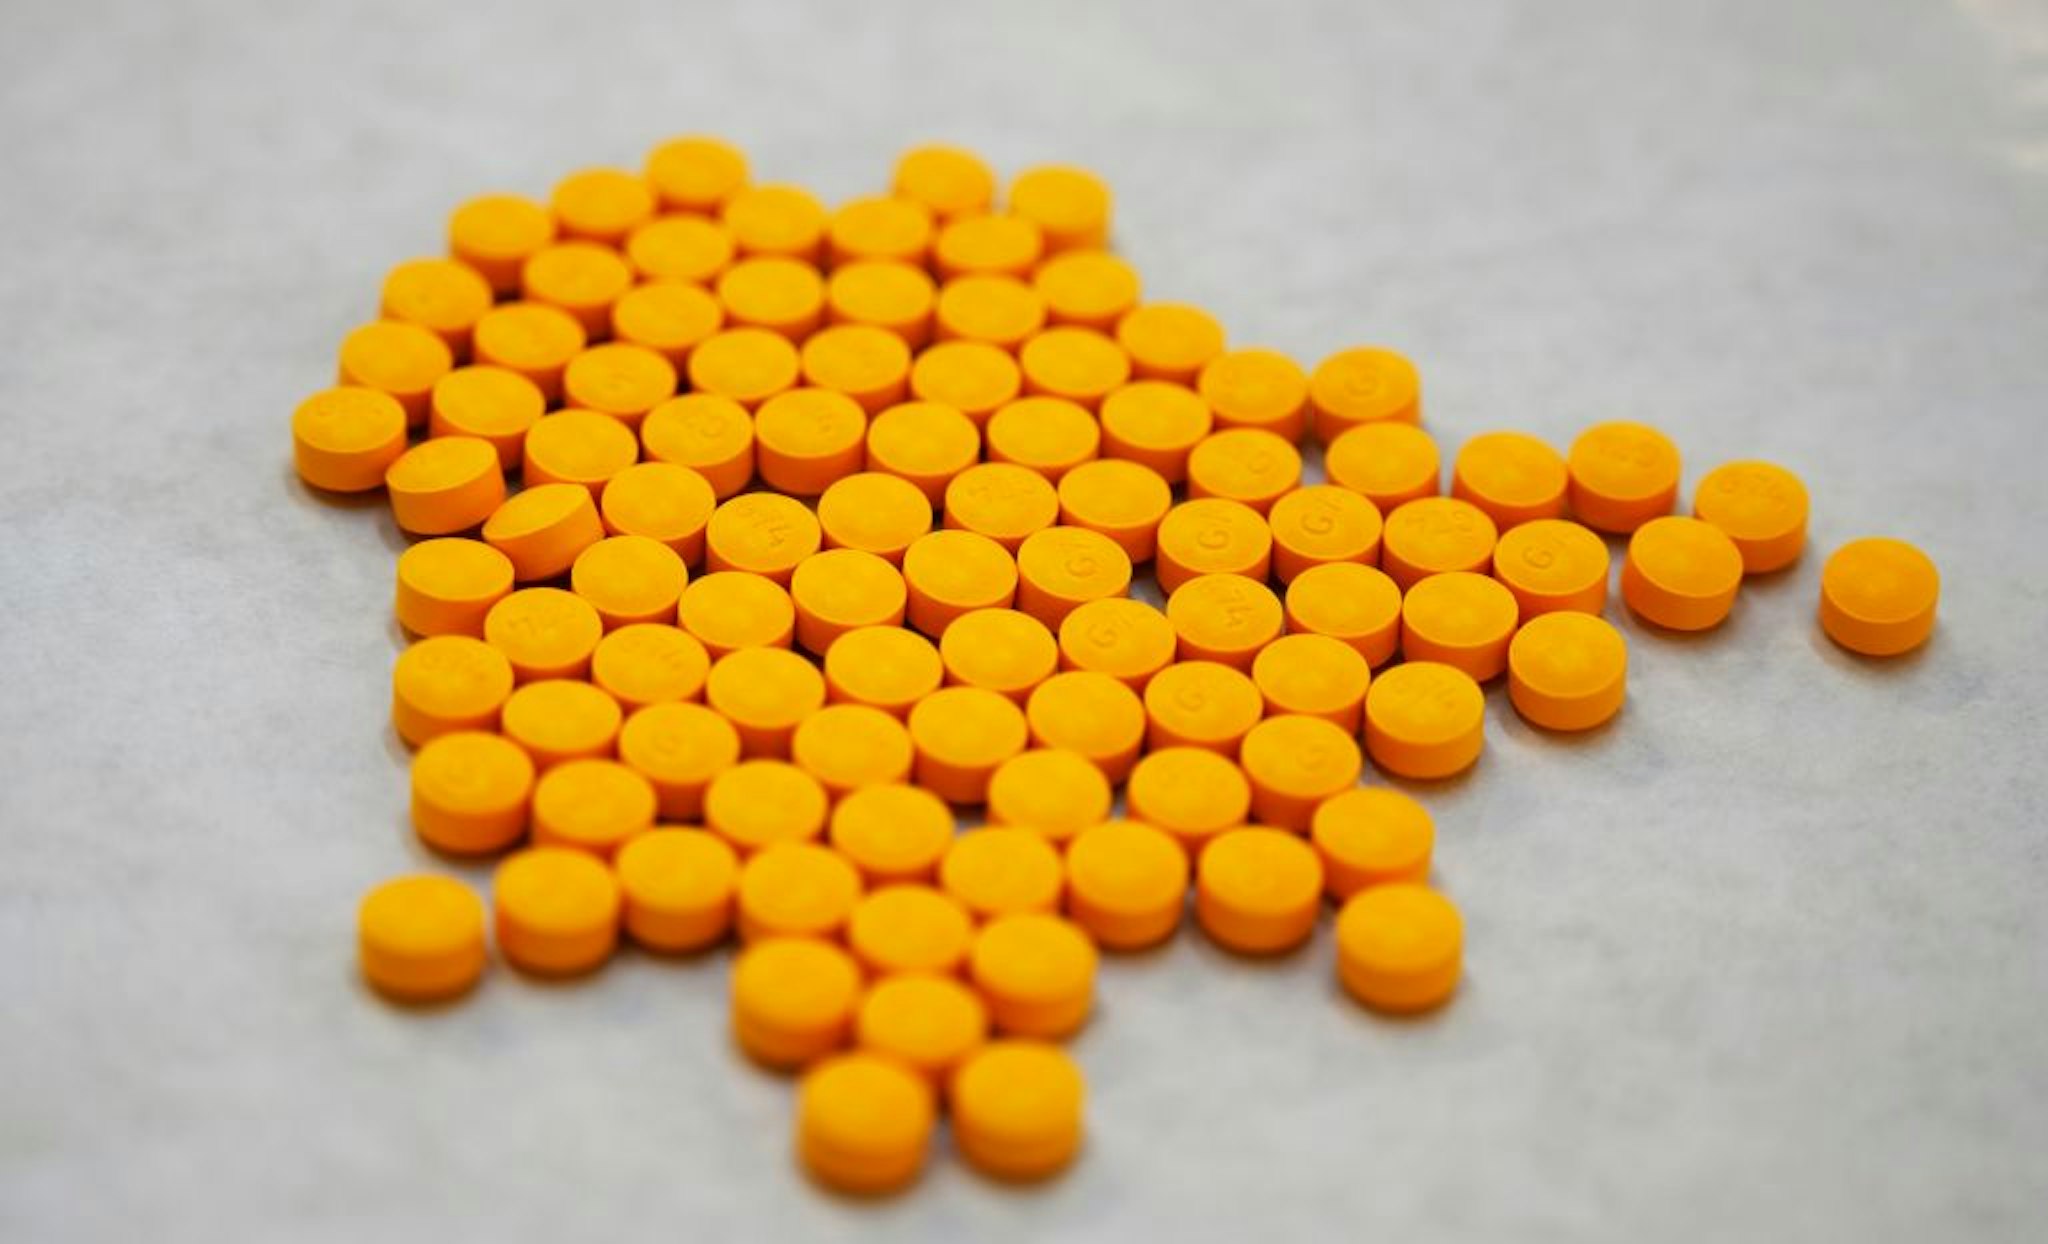 Tablets believed to be laced with fentanyl are displayed at the Drug Enforcement Administration Northeast Regional Laboratory on October 8, 2019, in New York. - According to US government data, about 32,000 Americans died from opioid overdoses in 2018. That accounts for 46 percent of all fatal overdoses. Fentanyl, a powerful painkiller approved by the US Food and Drug Administration for a range of conditions, has been central to the American opioid crisis which began in the late 1990s. (Photo by Don Emmert / AFP)